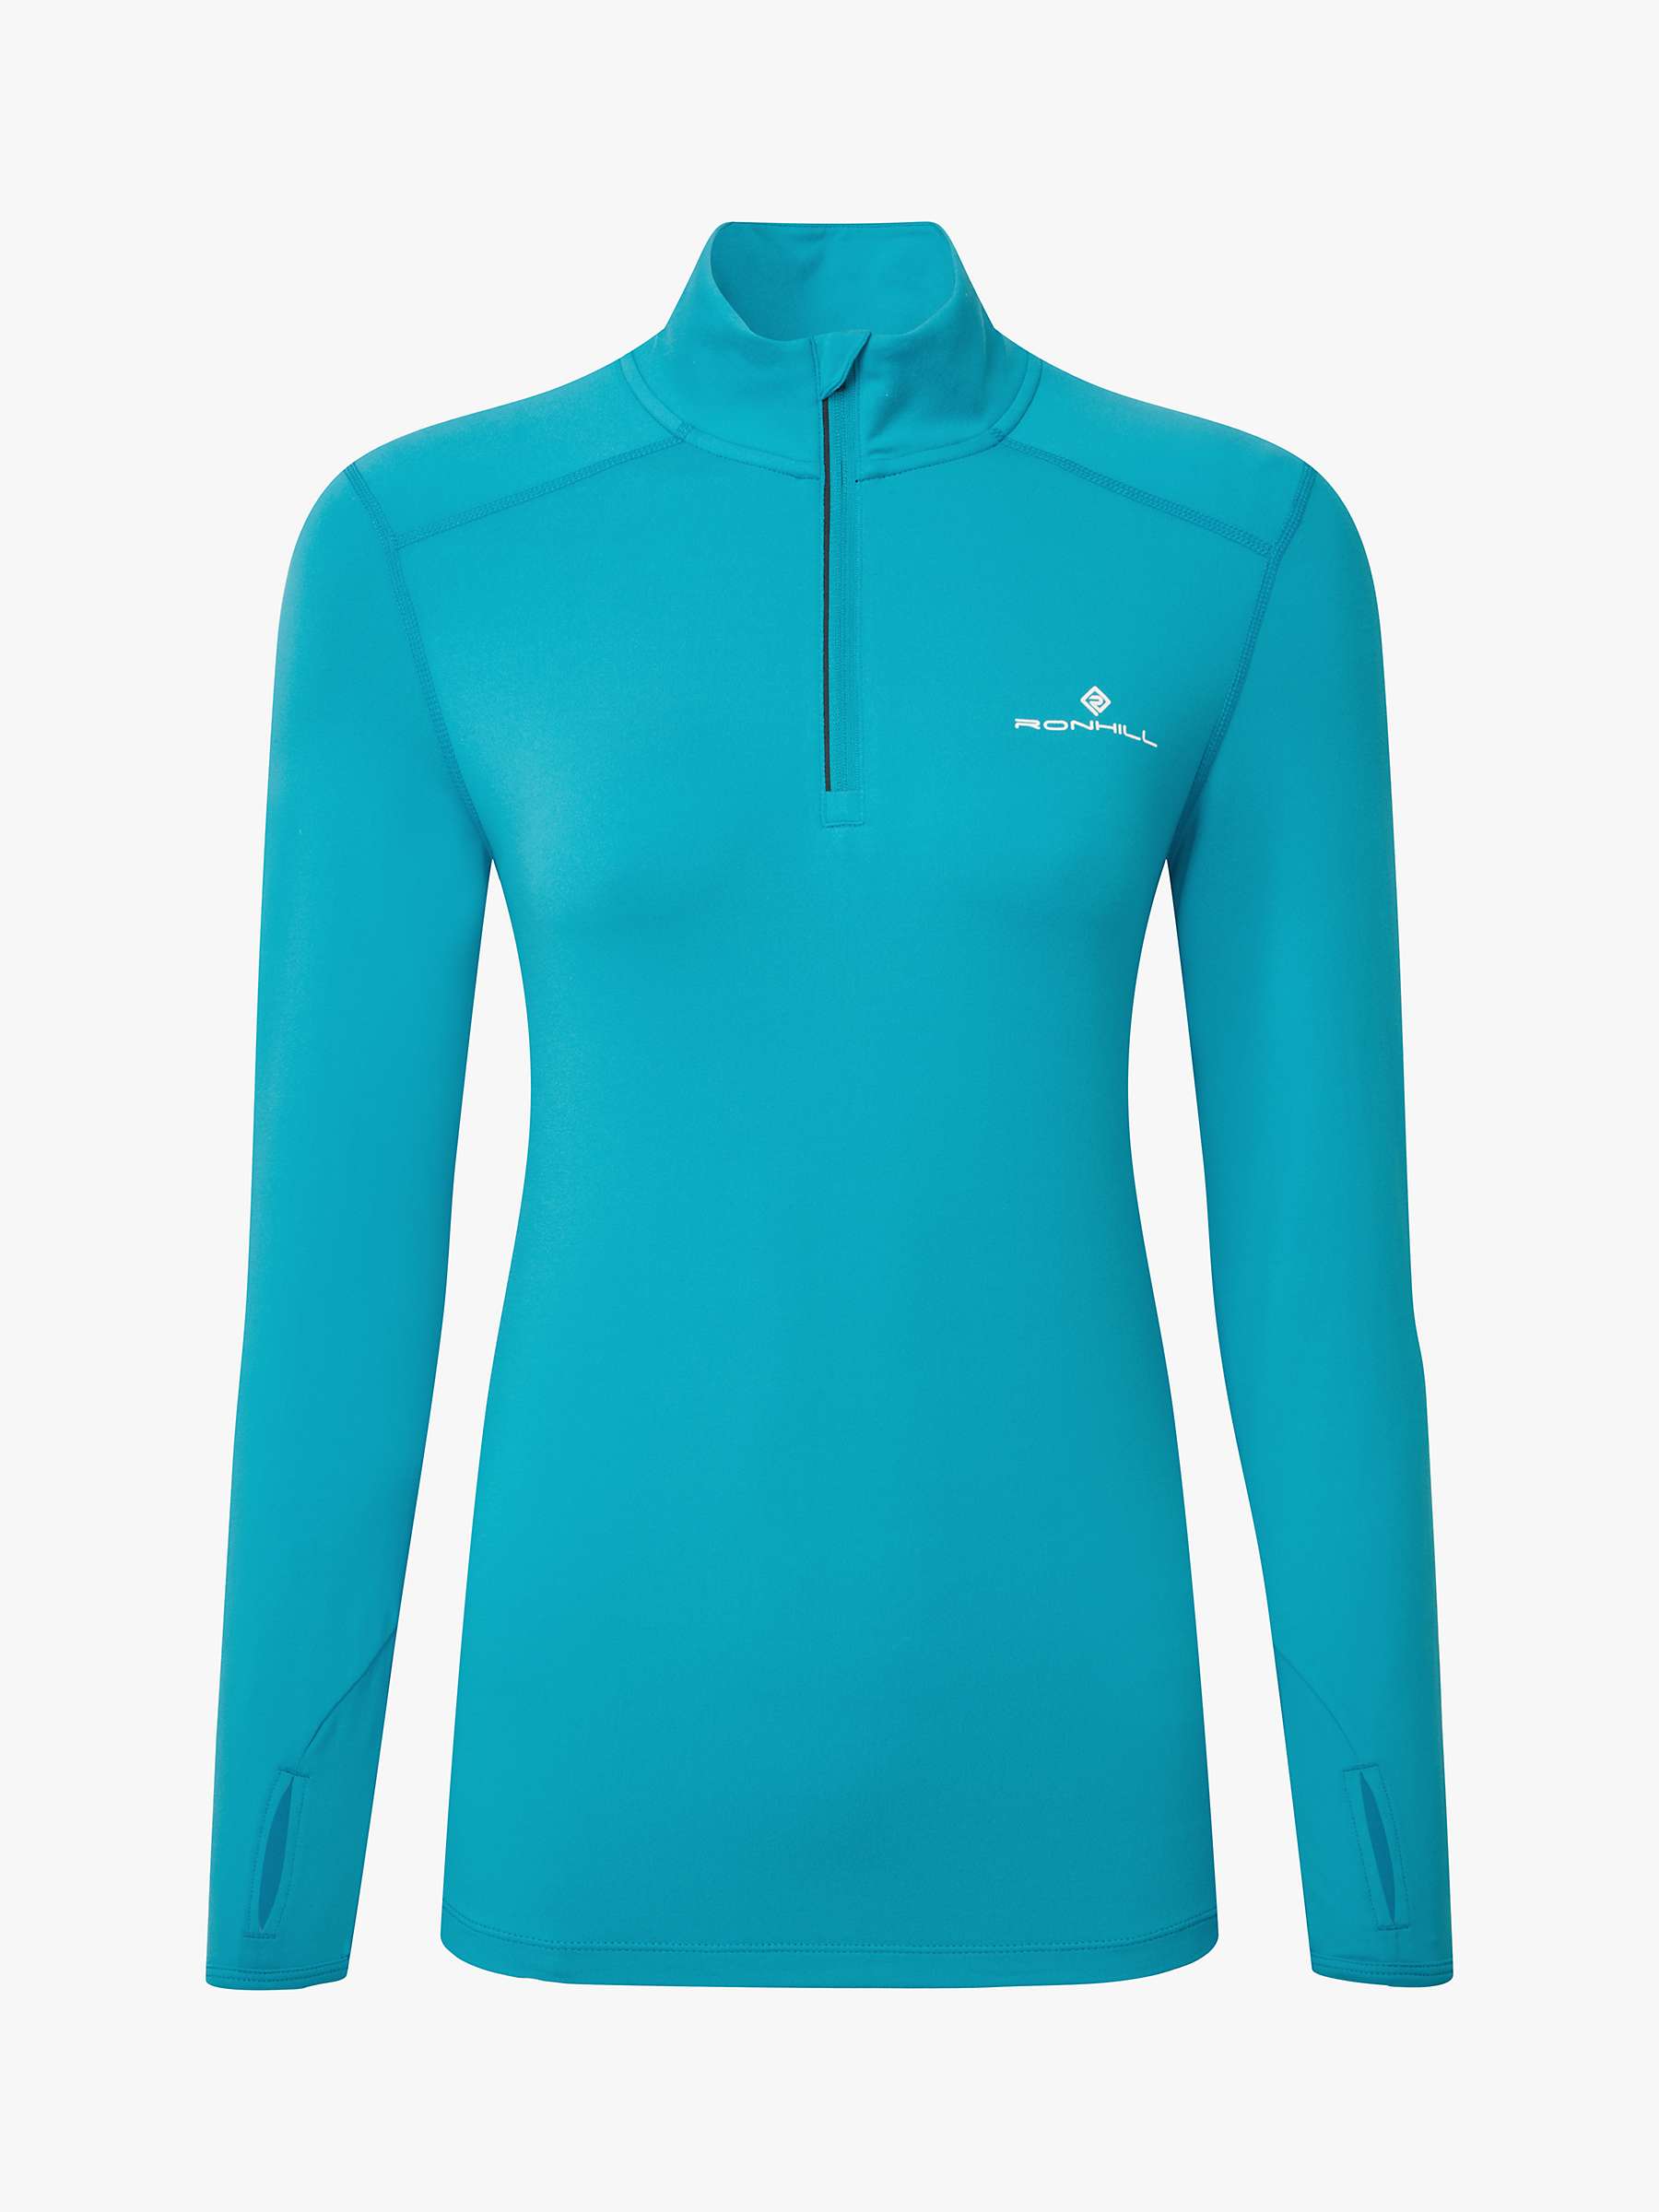 Buy Ronhill Half Zip Thermal Base Layer Top, Turquoise Online at johnlewis.com